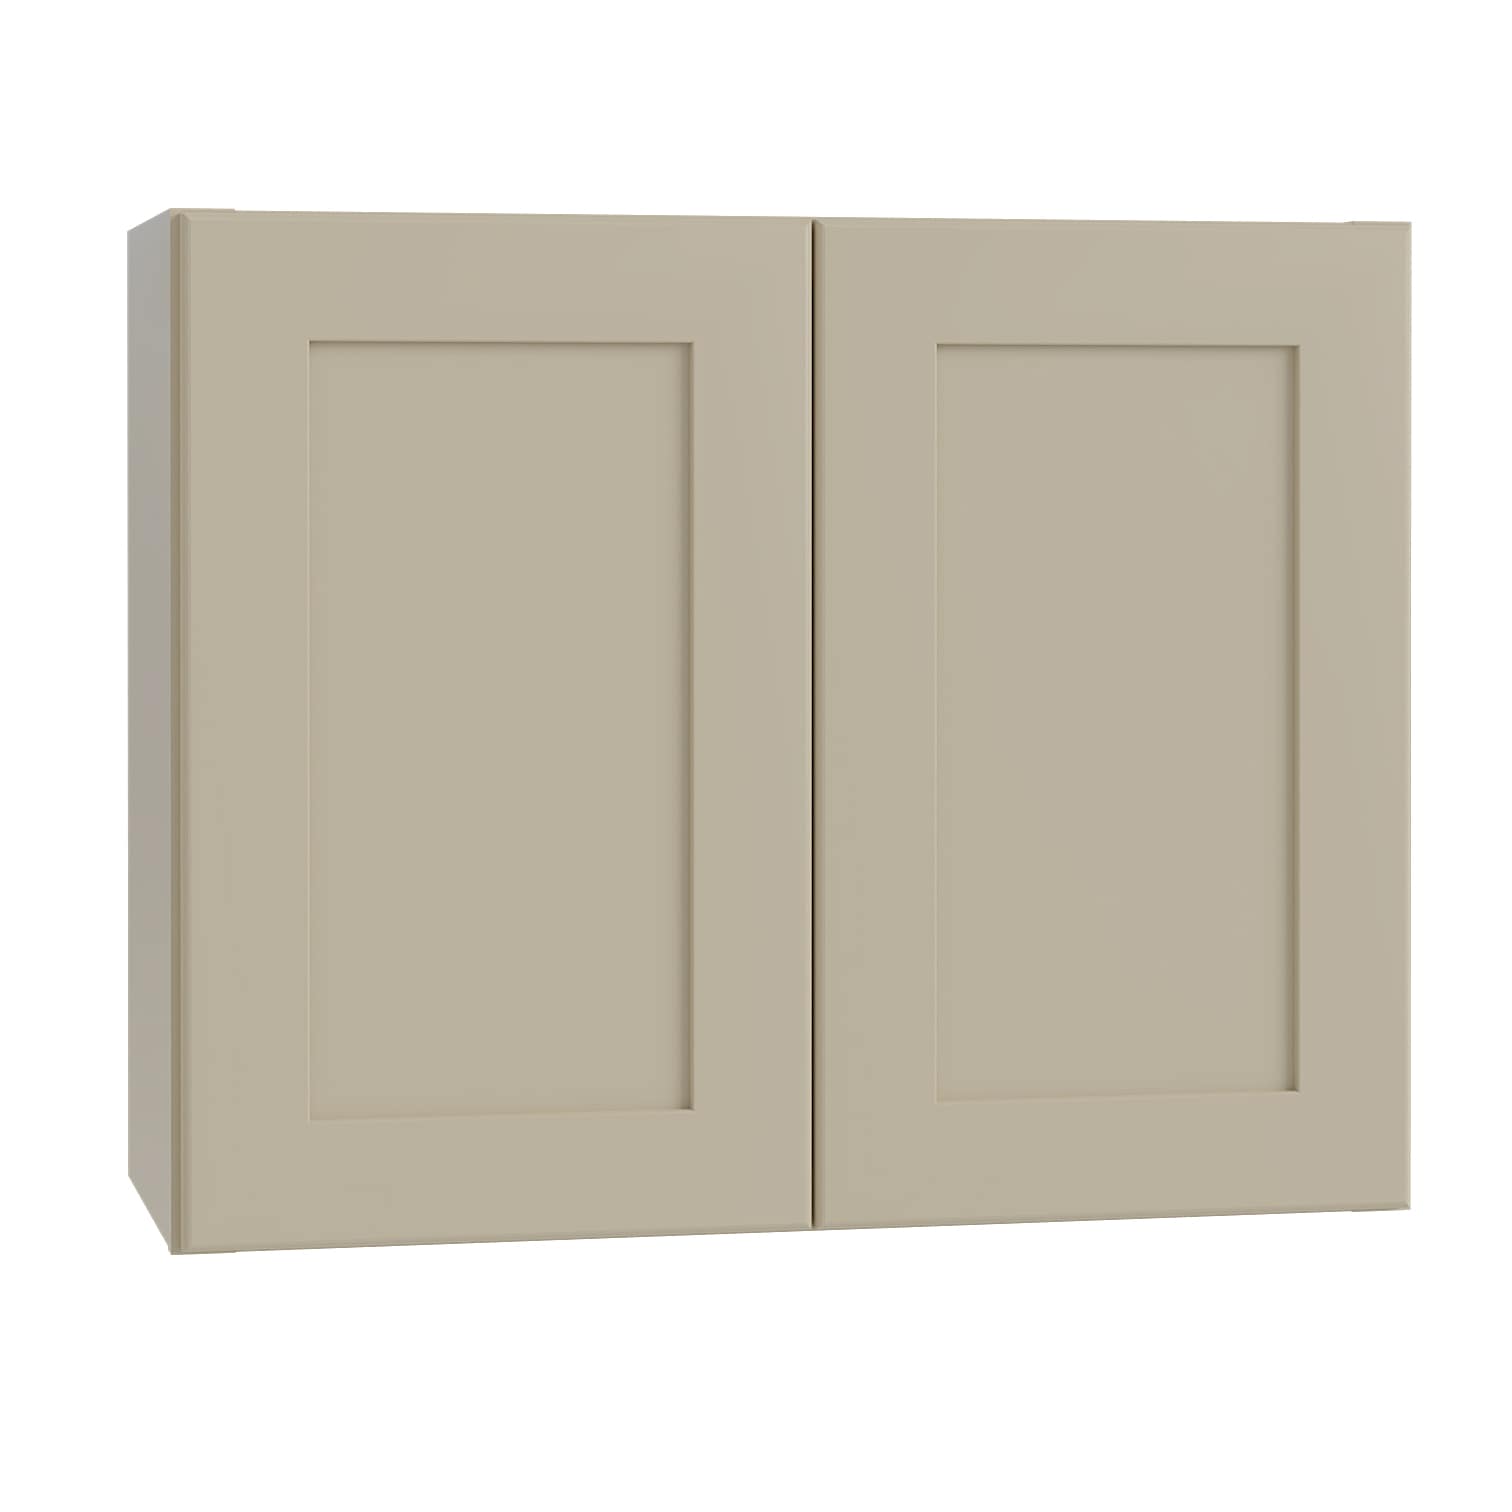 Luxxe Cabinetry 30-in W x 23.5-in H x 12-in D Norfolk Blended Cream Painted Door Wall Fully Assembled Semi-custom Cabinet in Off-White | W3024-NBC